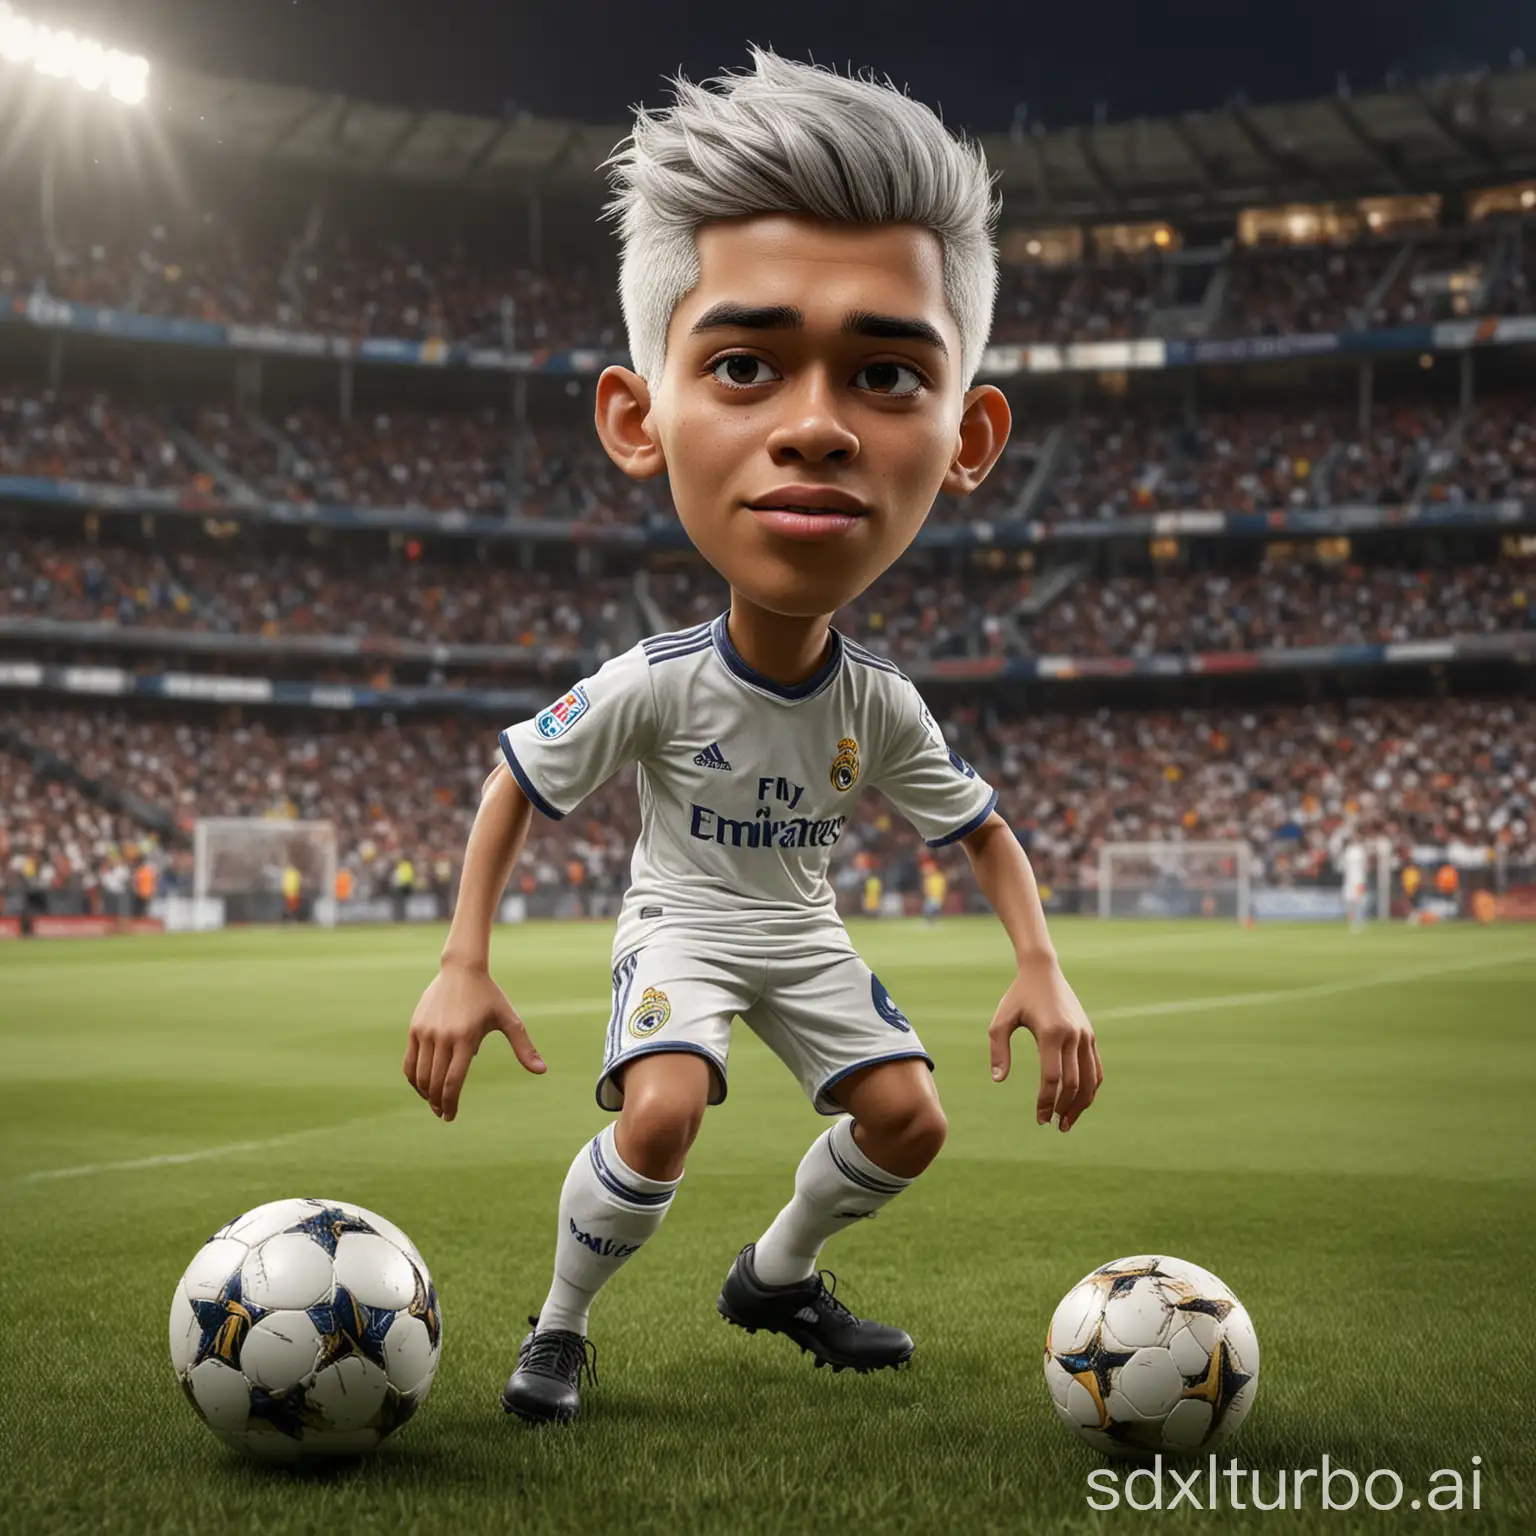 Create a caricature 4D hyperrealistic full body with a big head. an 18 year old Indonesian boy. Messy silver hair, oval face, serious face. Kicking the ball in the field of a magnificent football stadium. Wearing a Real Madrid club jersey. Background of the goal being ready. Use natural lighting. Sharp image quality, HD, UHD, 4D Render,Bird eye lens.